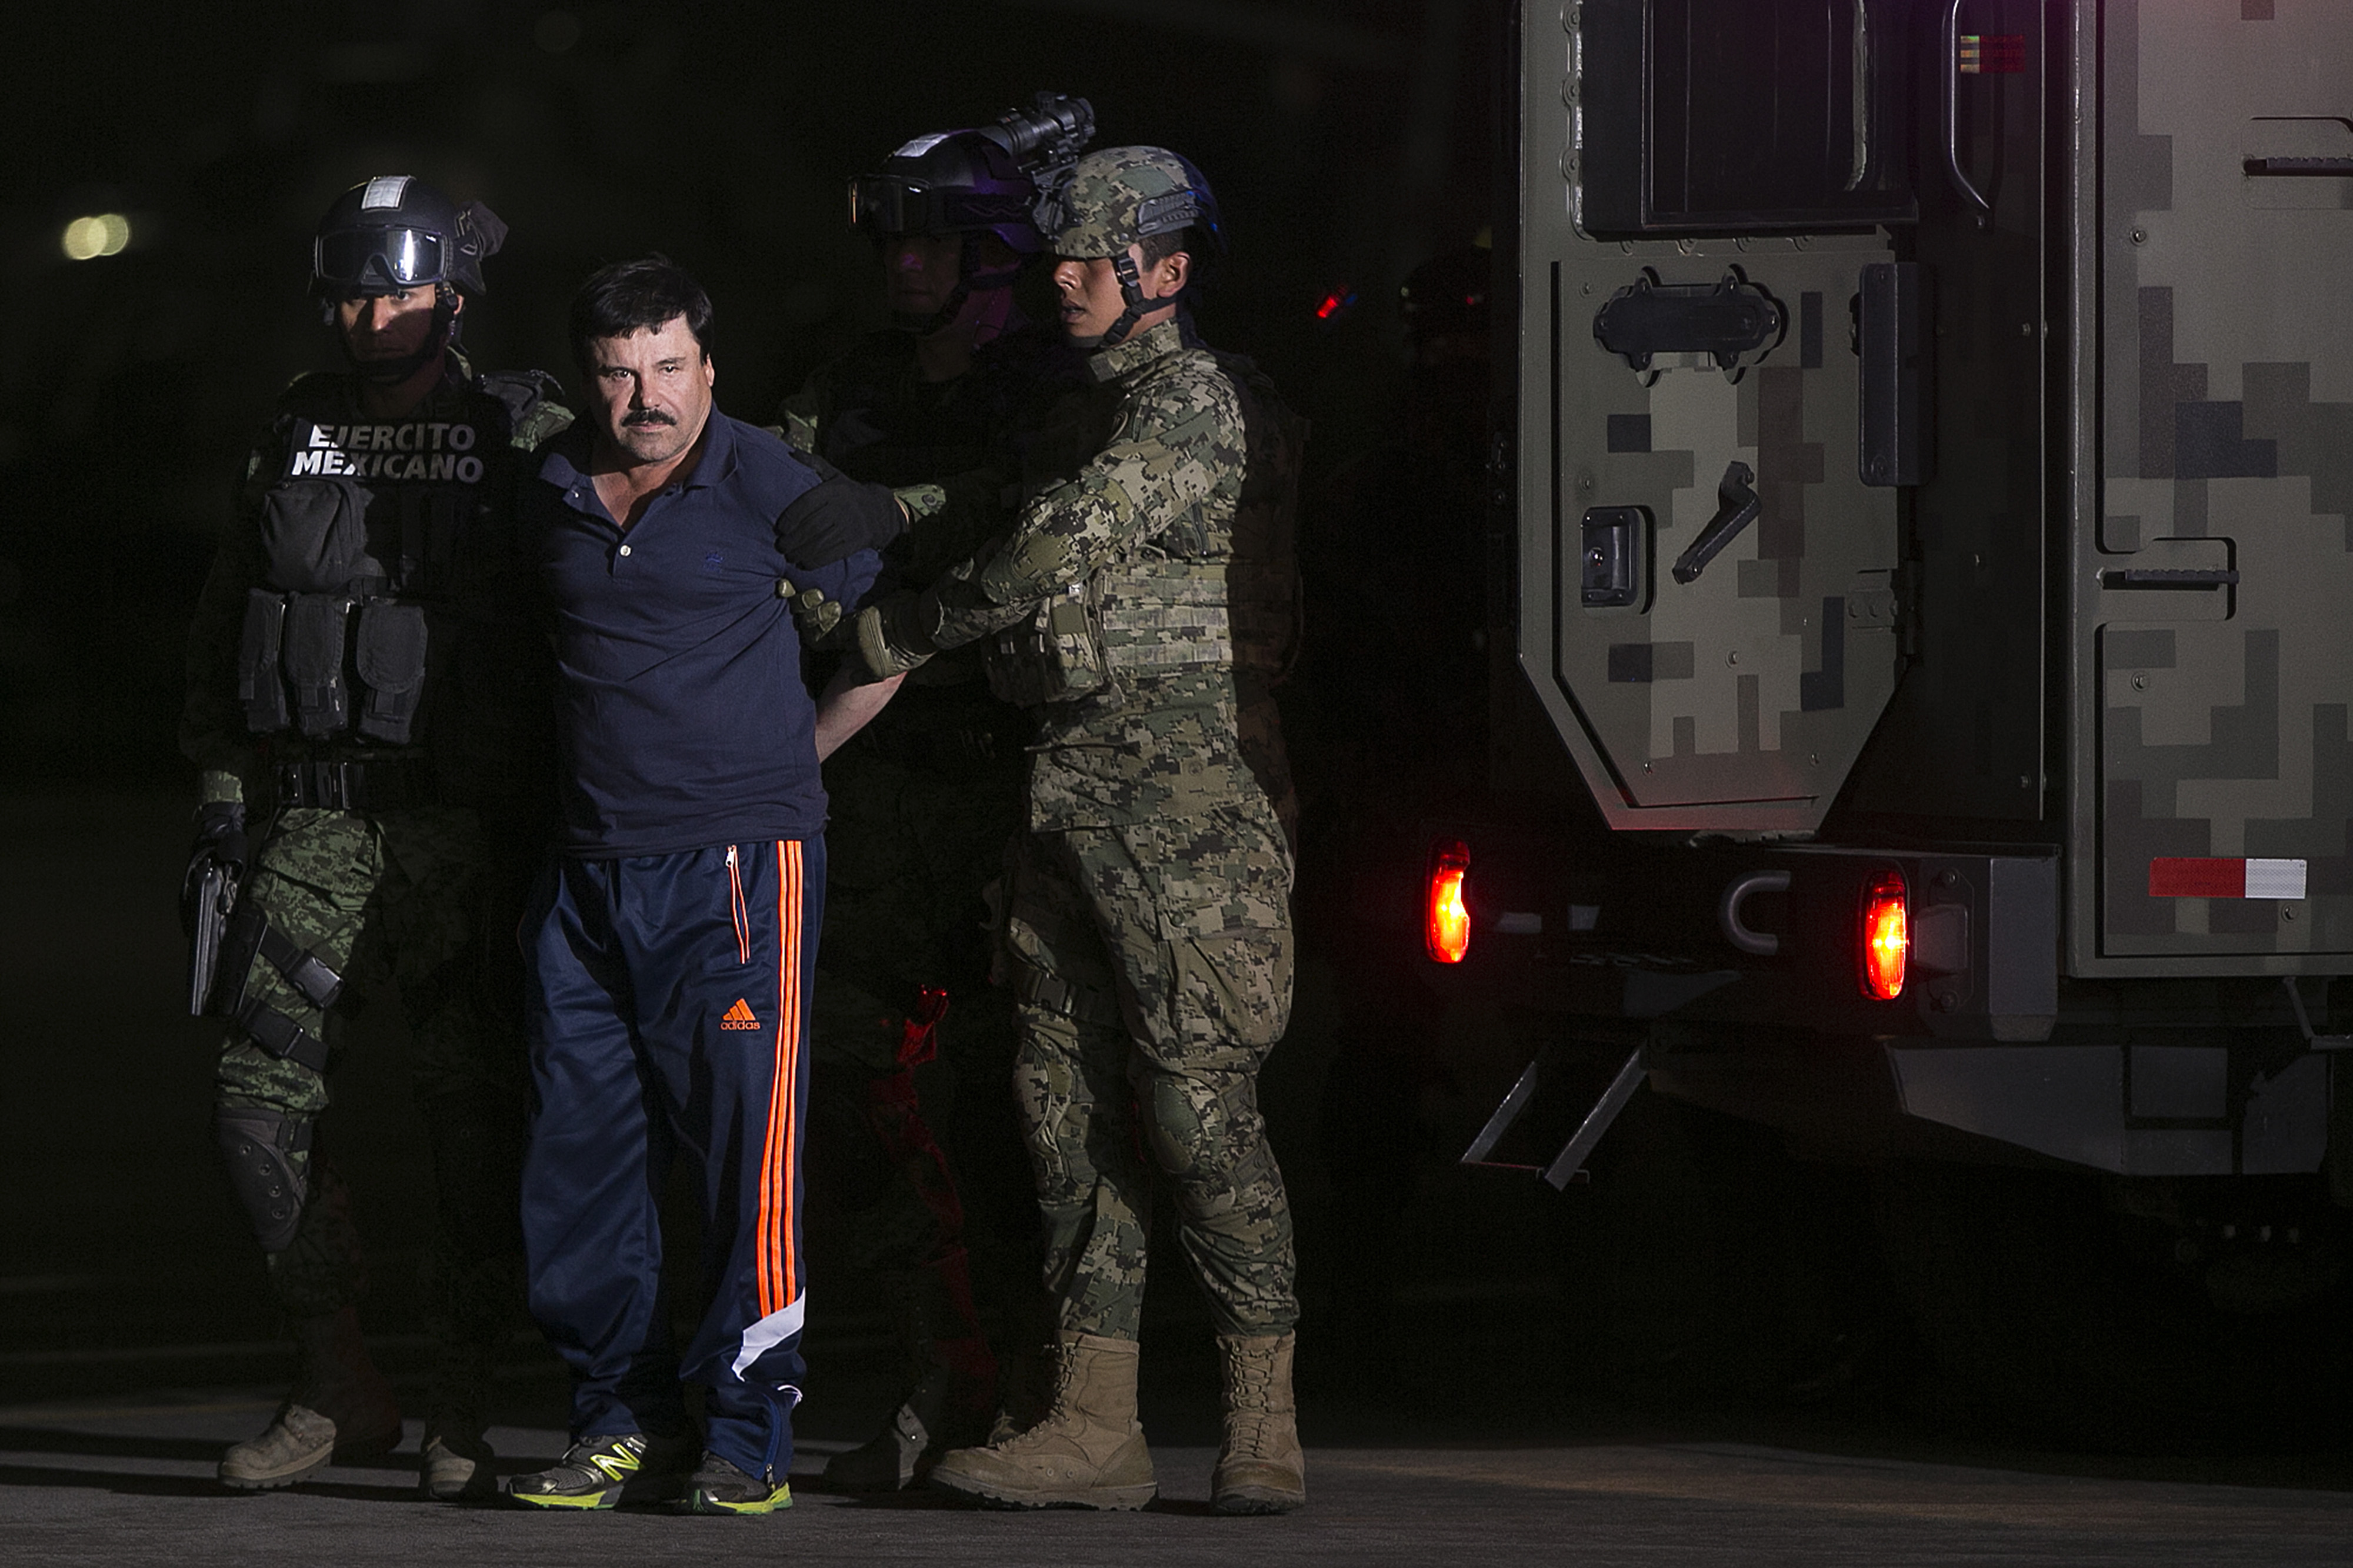 Joaquin Guzman, the world's most wanted-drug trafficker, second left, is escorted by Mexican security forces at a Navy hangar in Mexico City, Mexico, on Jan. 8, 2016. (Bloomberg via Getty Images)